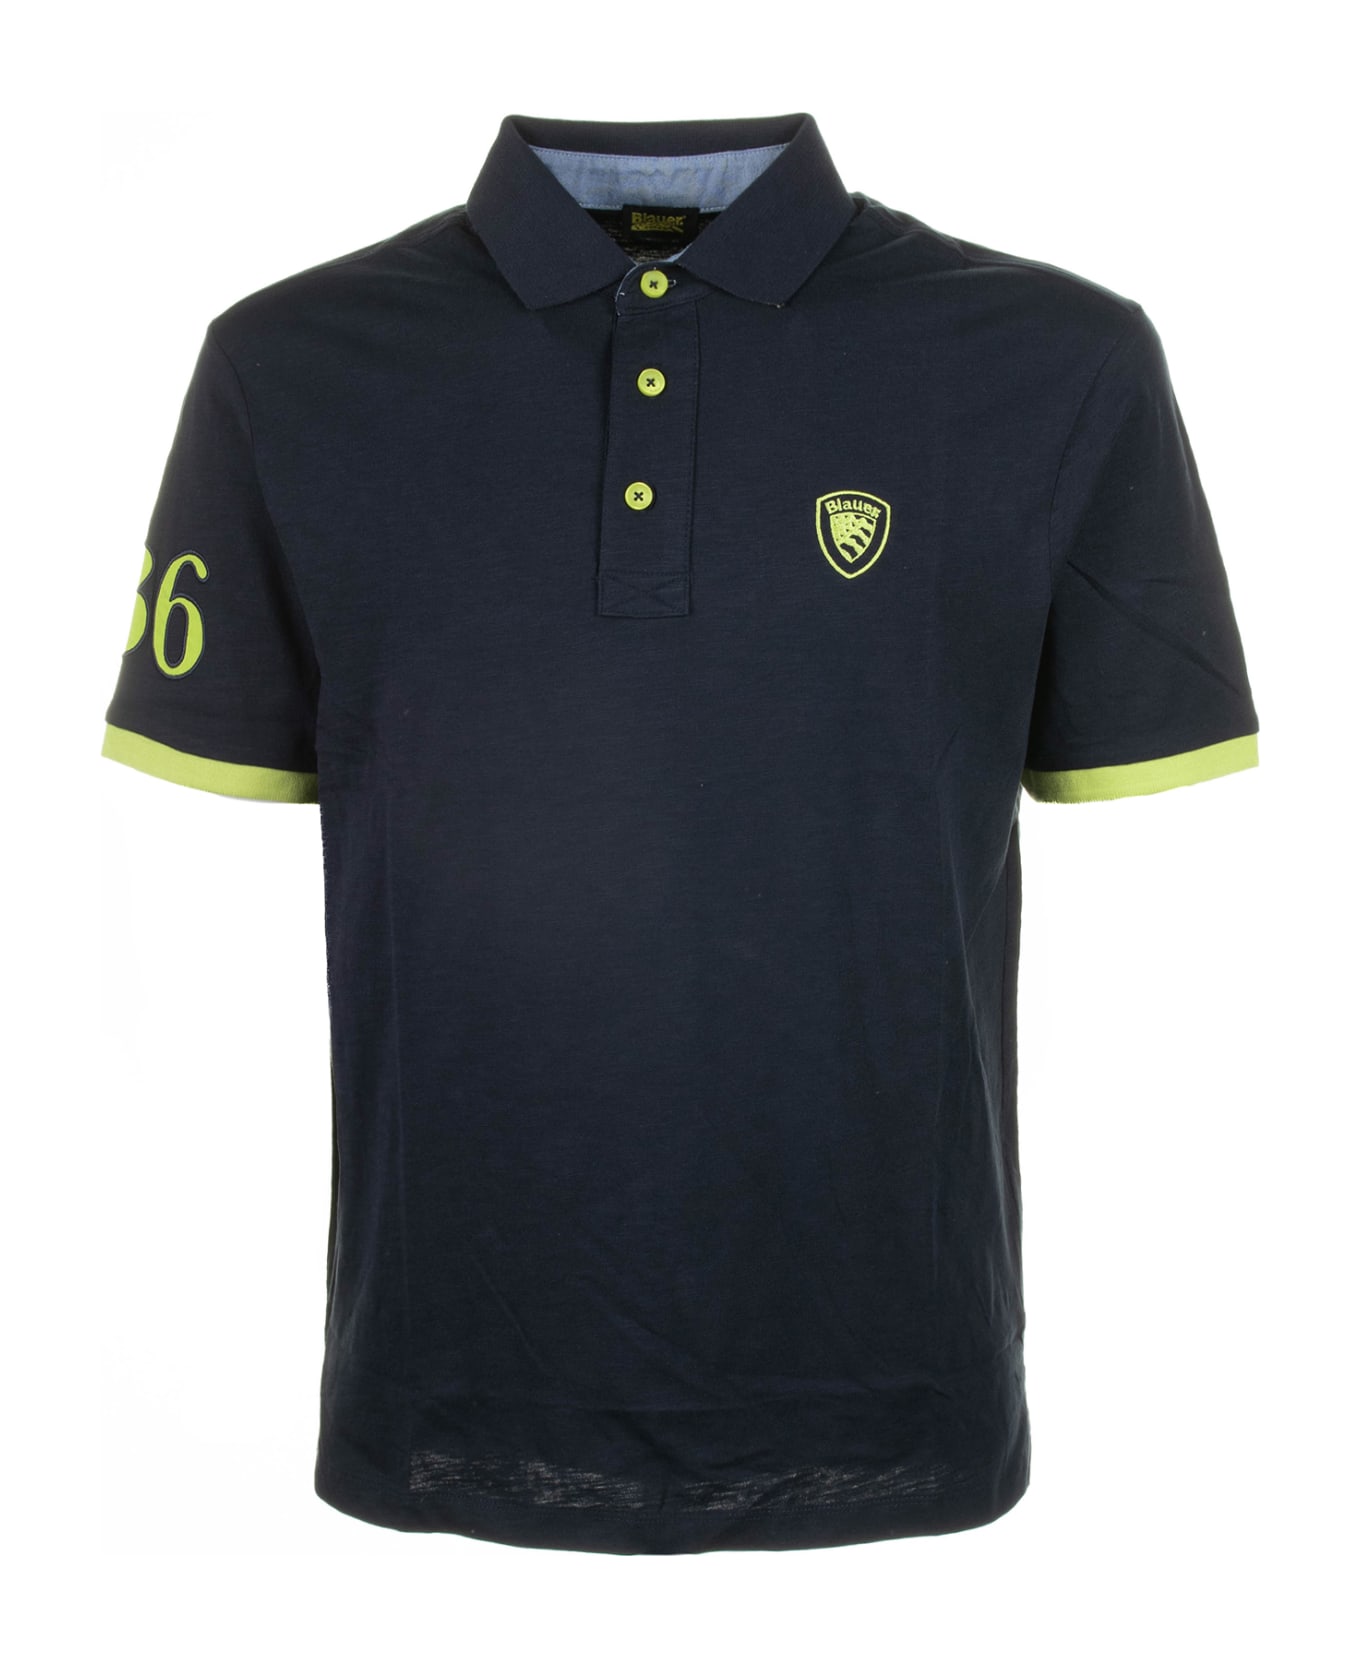 Blauer Polo 36 With Short Sleeves In Navy Blue - Blu